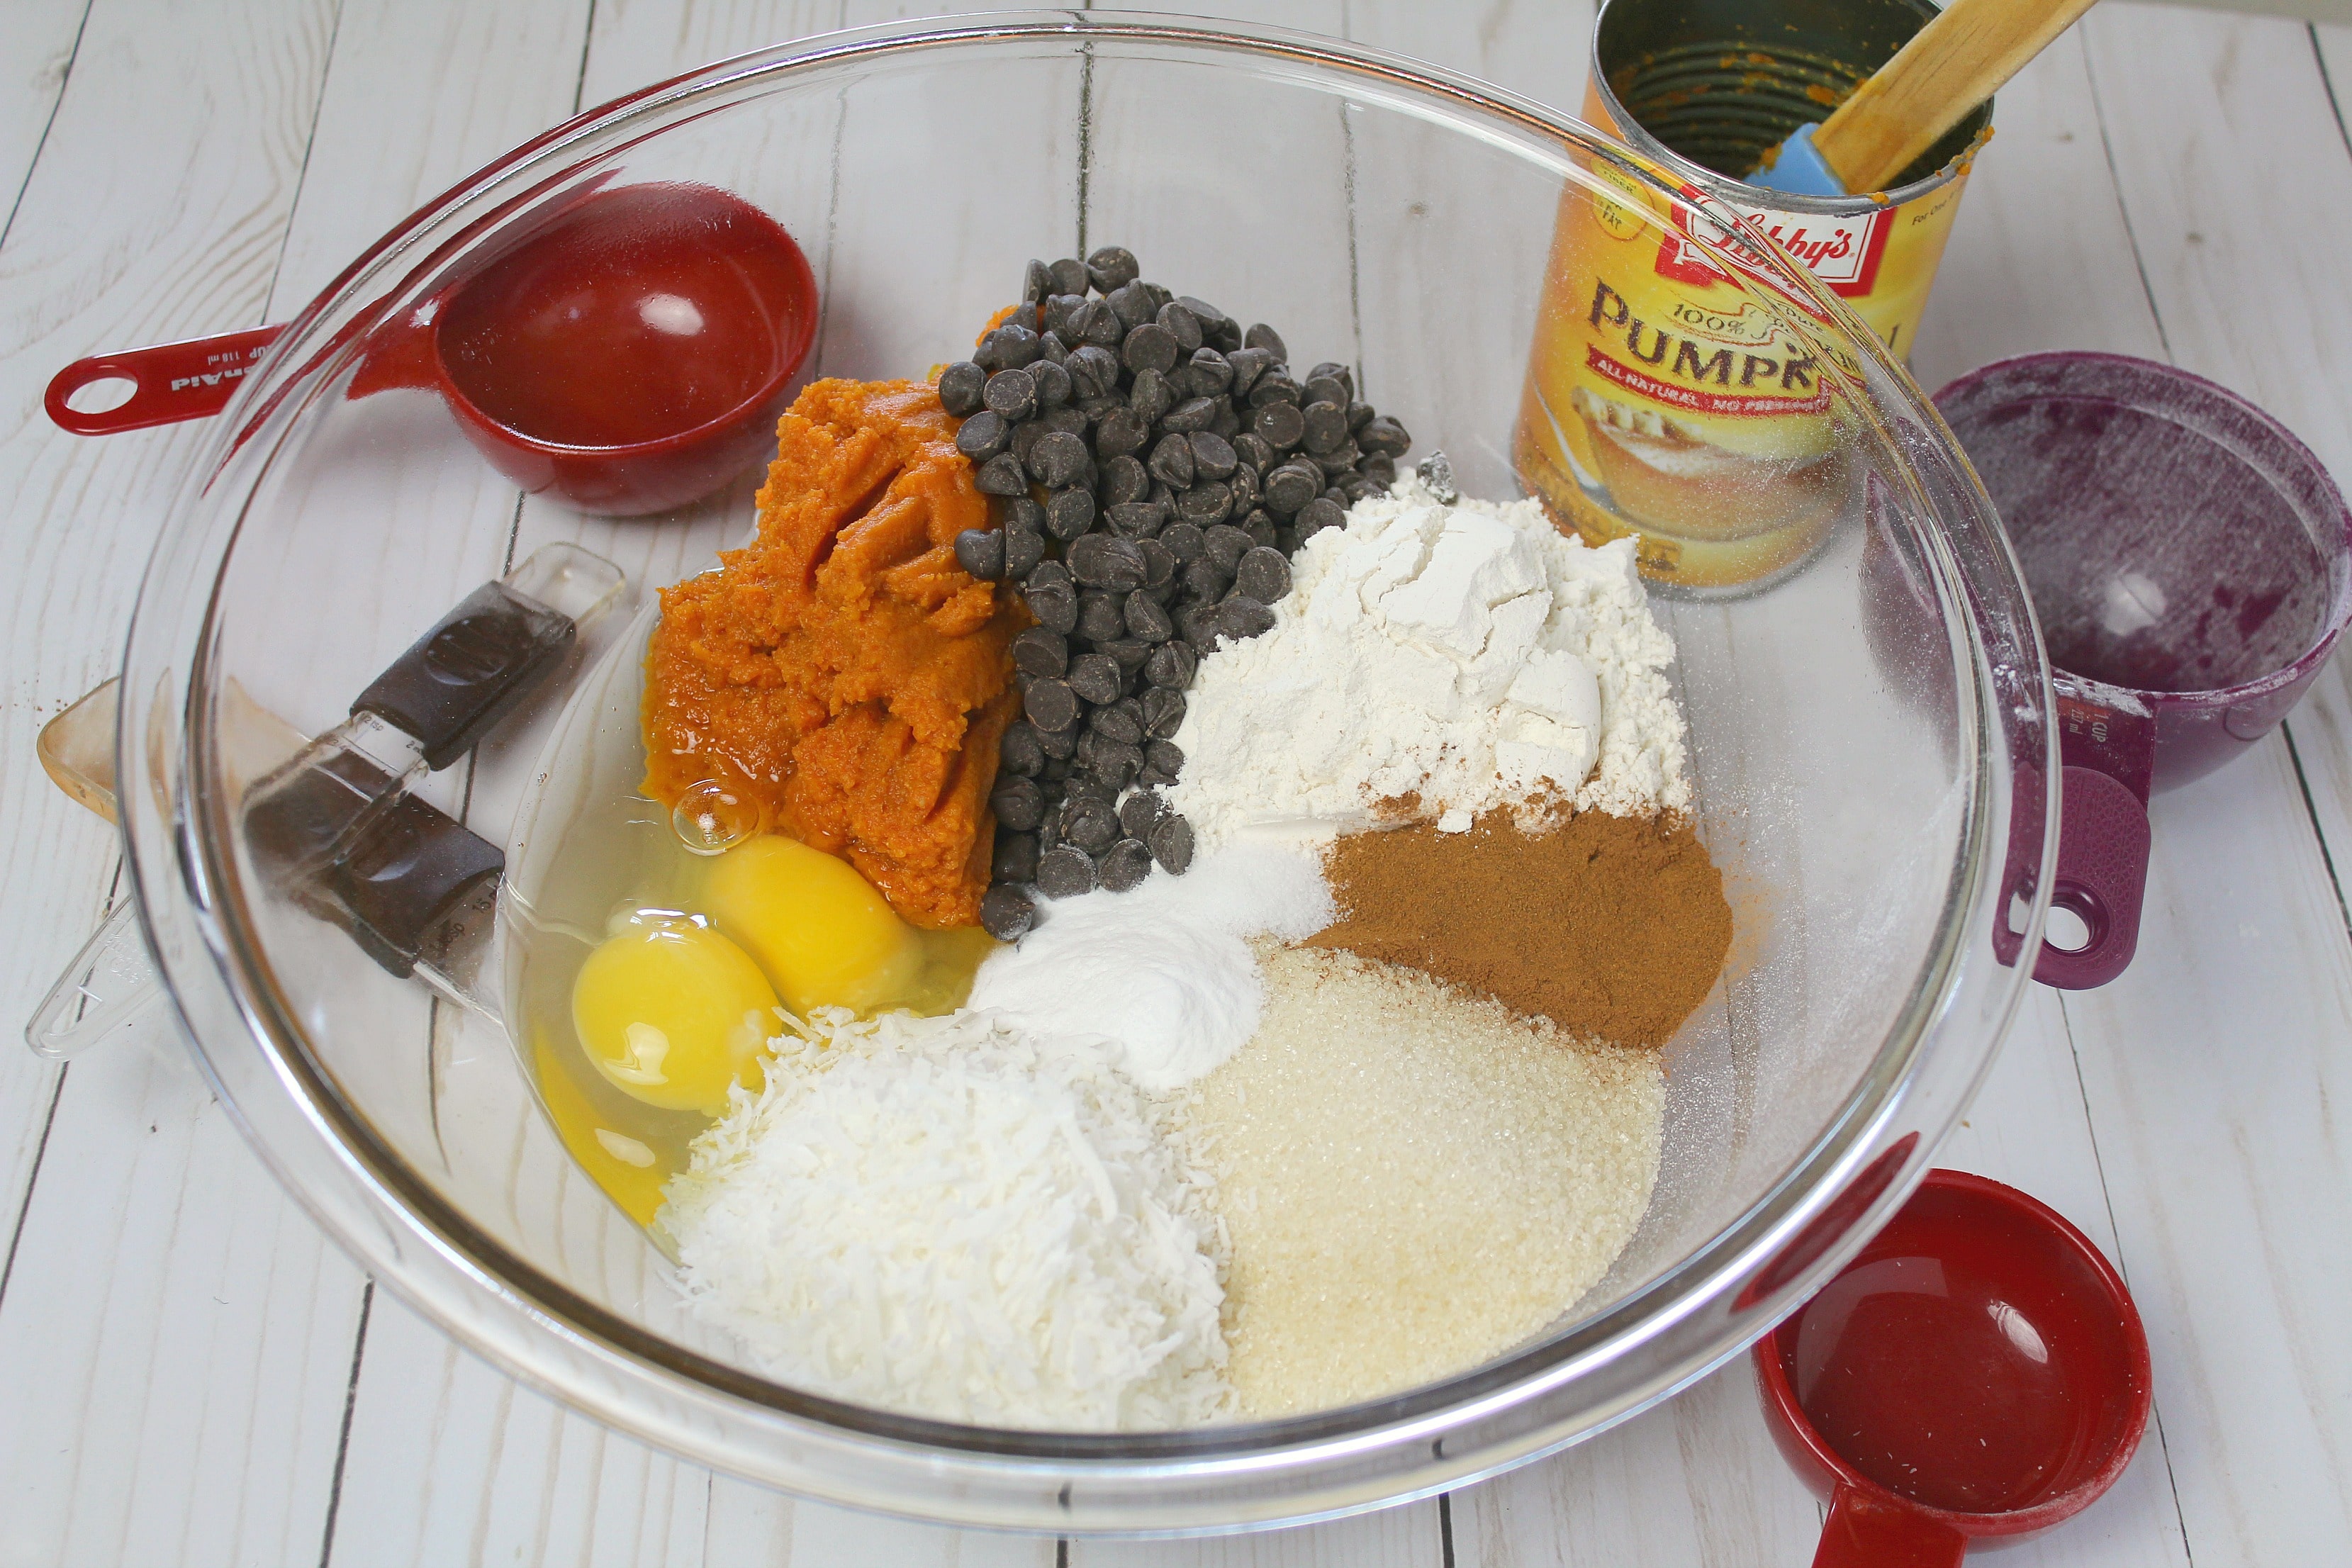 In large bowl, mix together flour, sugar, cinnamon, baking soda, salt, eggs, pumpkin, coconut and chocolate chips.  